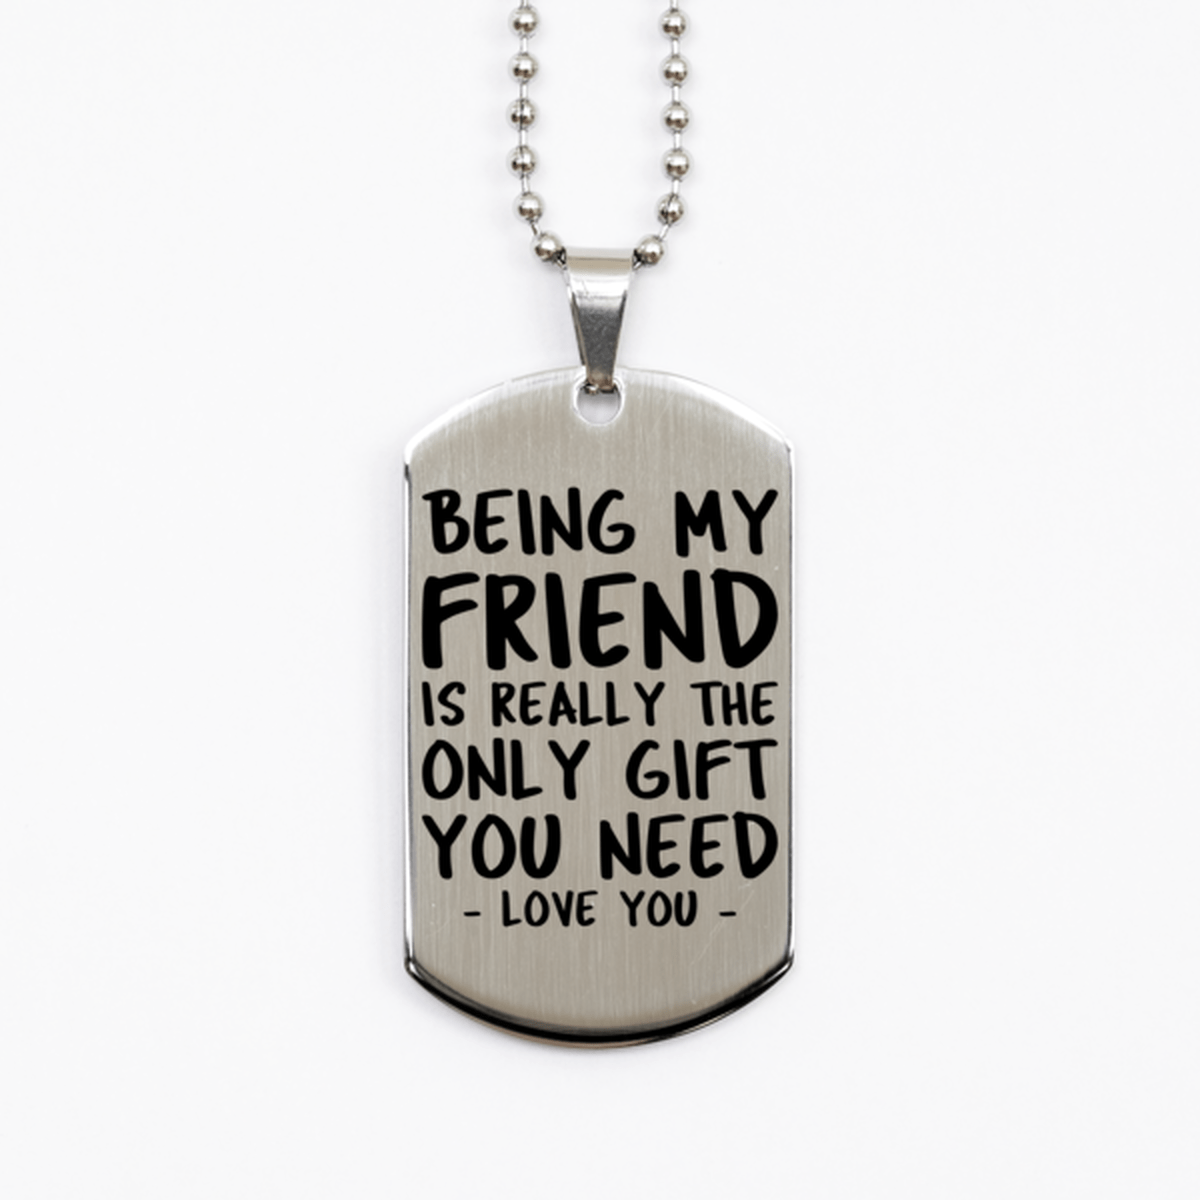 Funny Friend Silver Dog Tag Necklace, Being My Friend Is Really the Only Gift You Need, Best Birthday Gifts for Friend